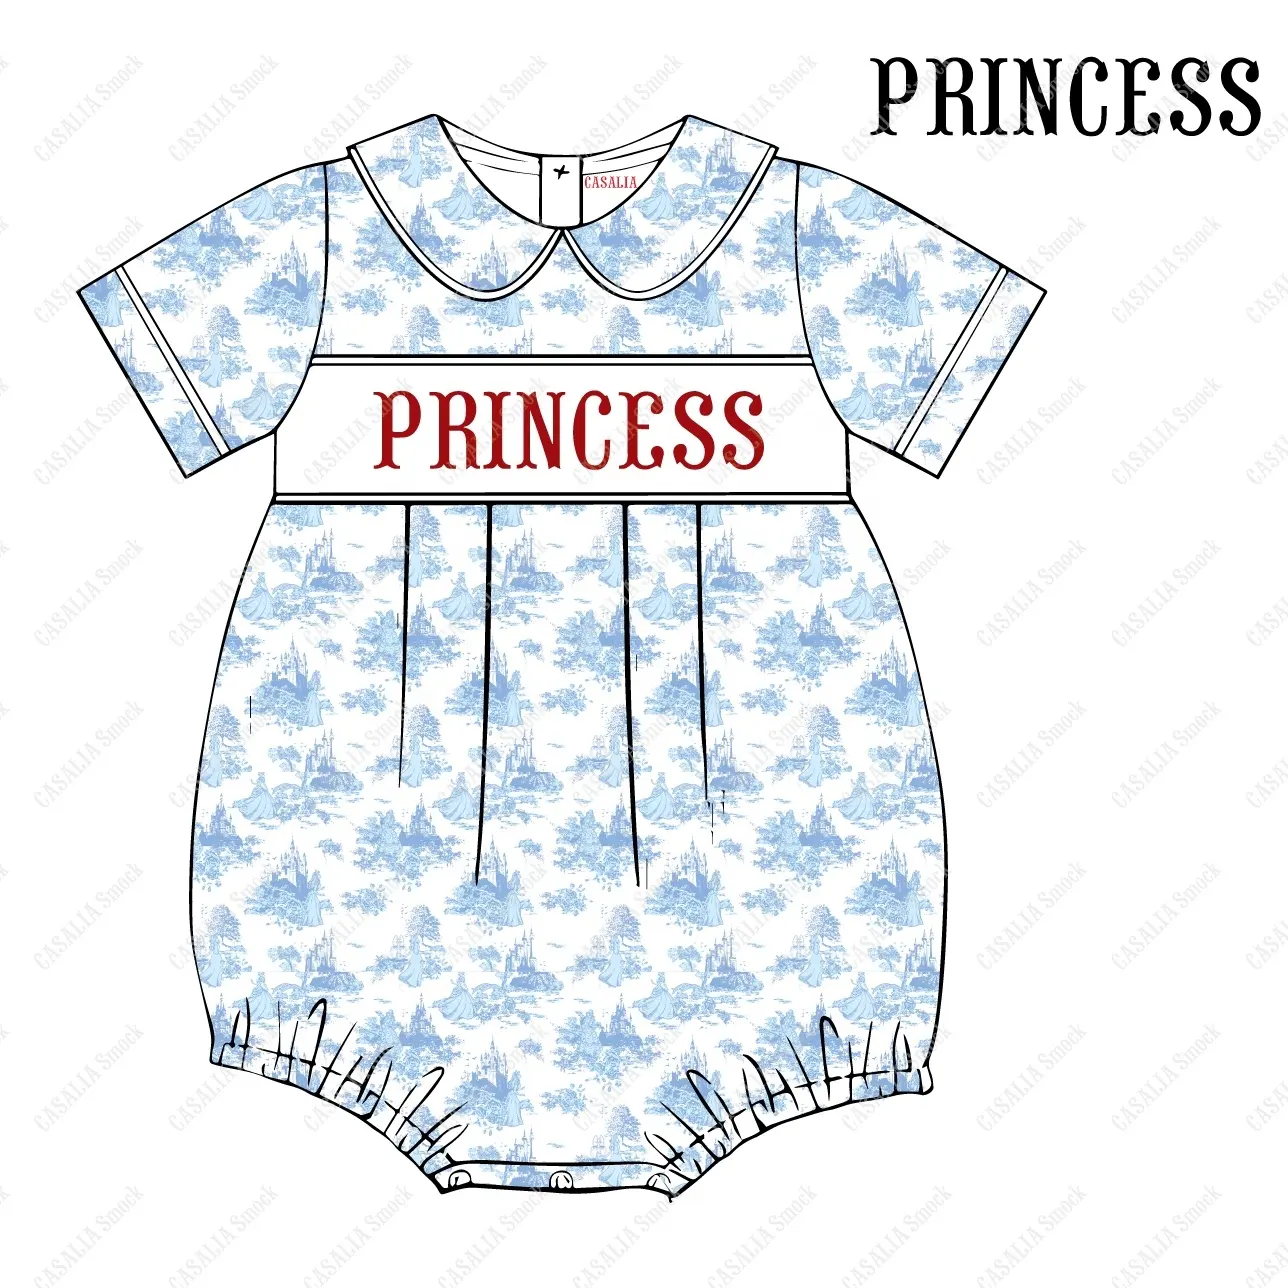 Handmade Smocked Bubble Romper Dress built in letter PRINCESS Words or Cartoon Character, Toile de Jouy